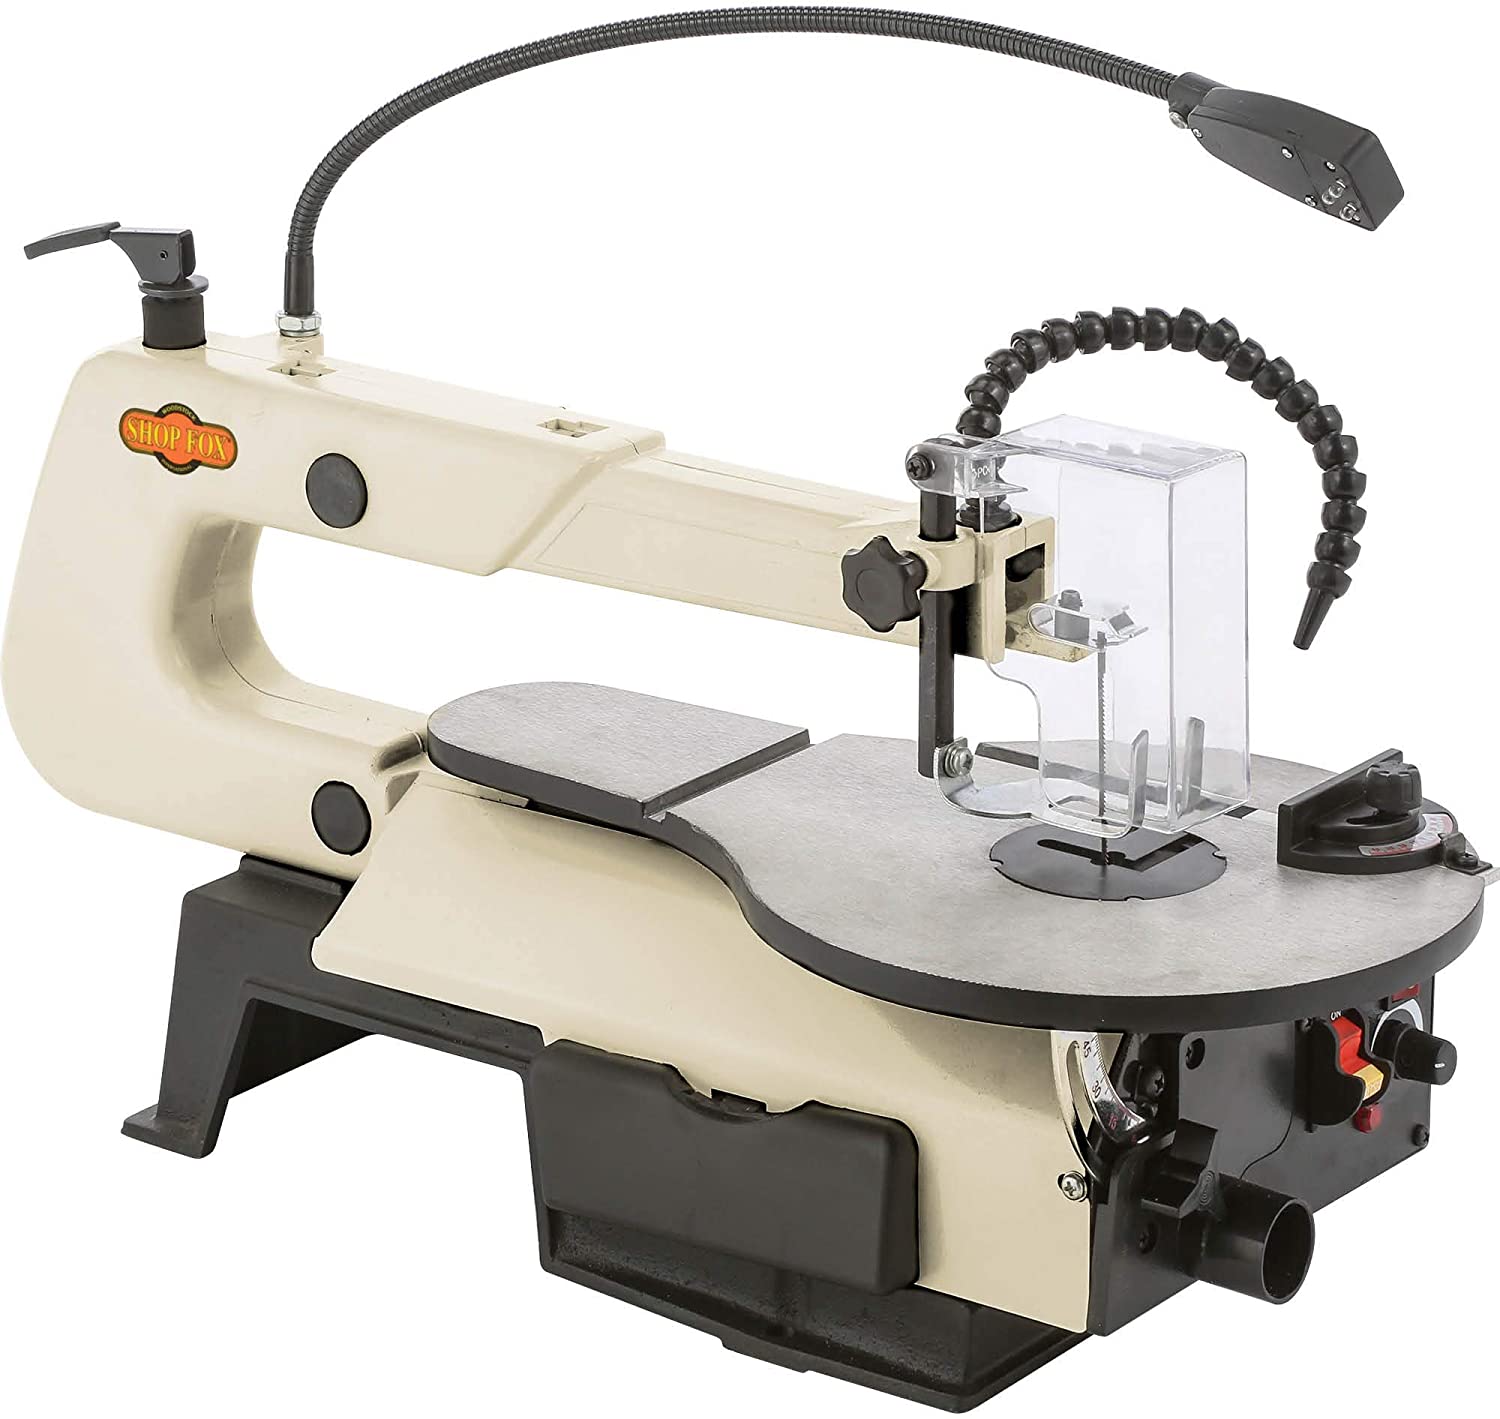 Shop Fox W1872 16" VS Scroll Saw with Foot Switch, LED, Miter Gauge, Rotary Shaft